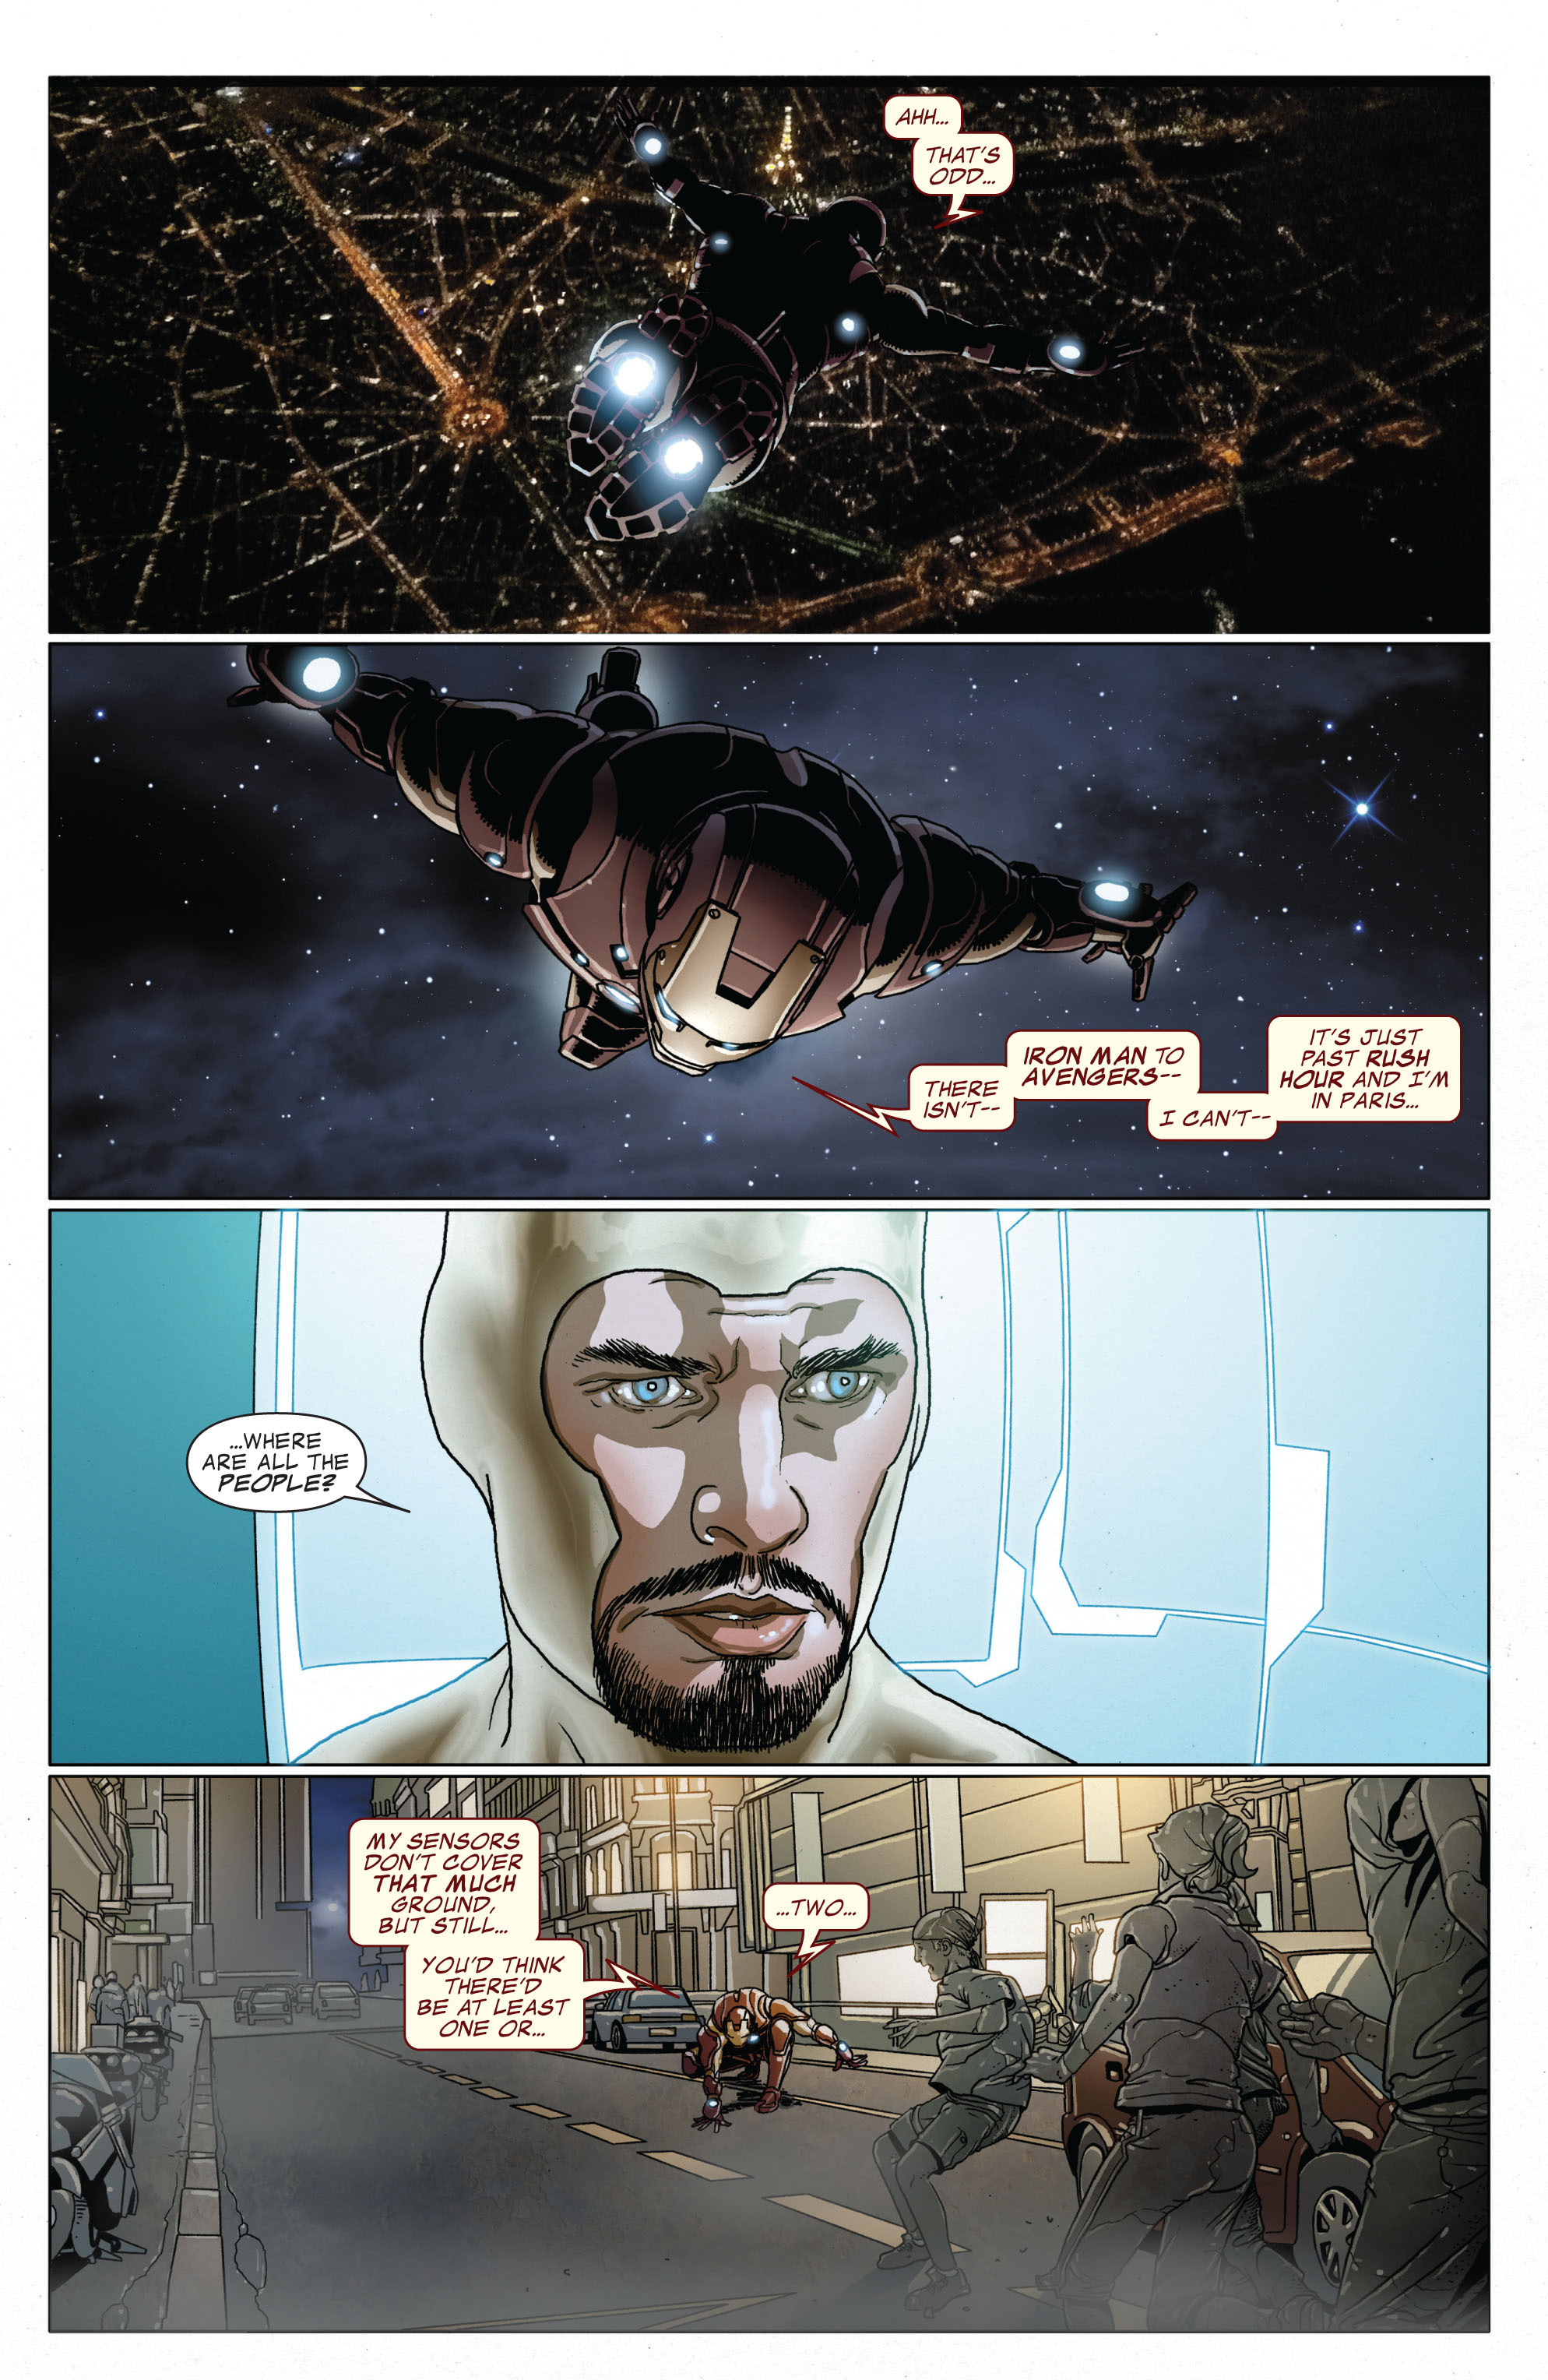 Invincible Iron Man (2008) 504 Page 7